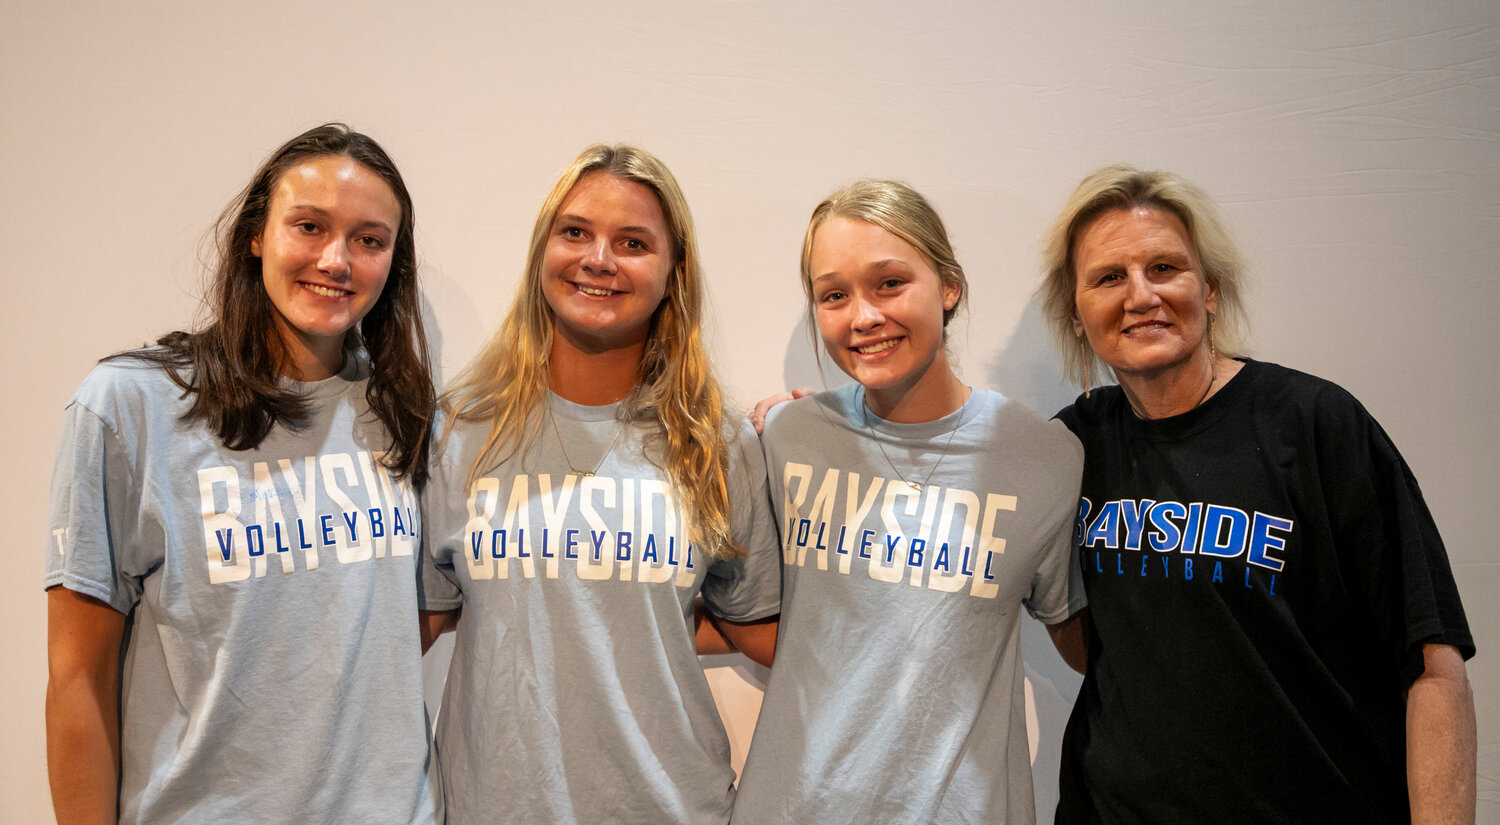 The Bayside Academy Admirals were the first Baldwin County team to take the main stage at the Volleyball Media Day hosted at Daphne High School on Monday, Aug. 7. Pictured from the left are Blakeley Robbins, Maysie Douglas, Misty Kate Smith and head coach Ann Schilling.